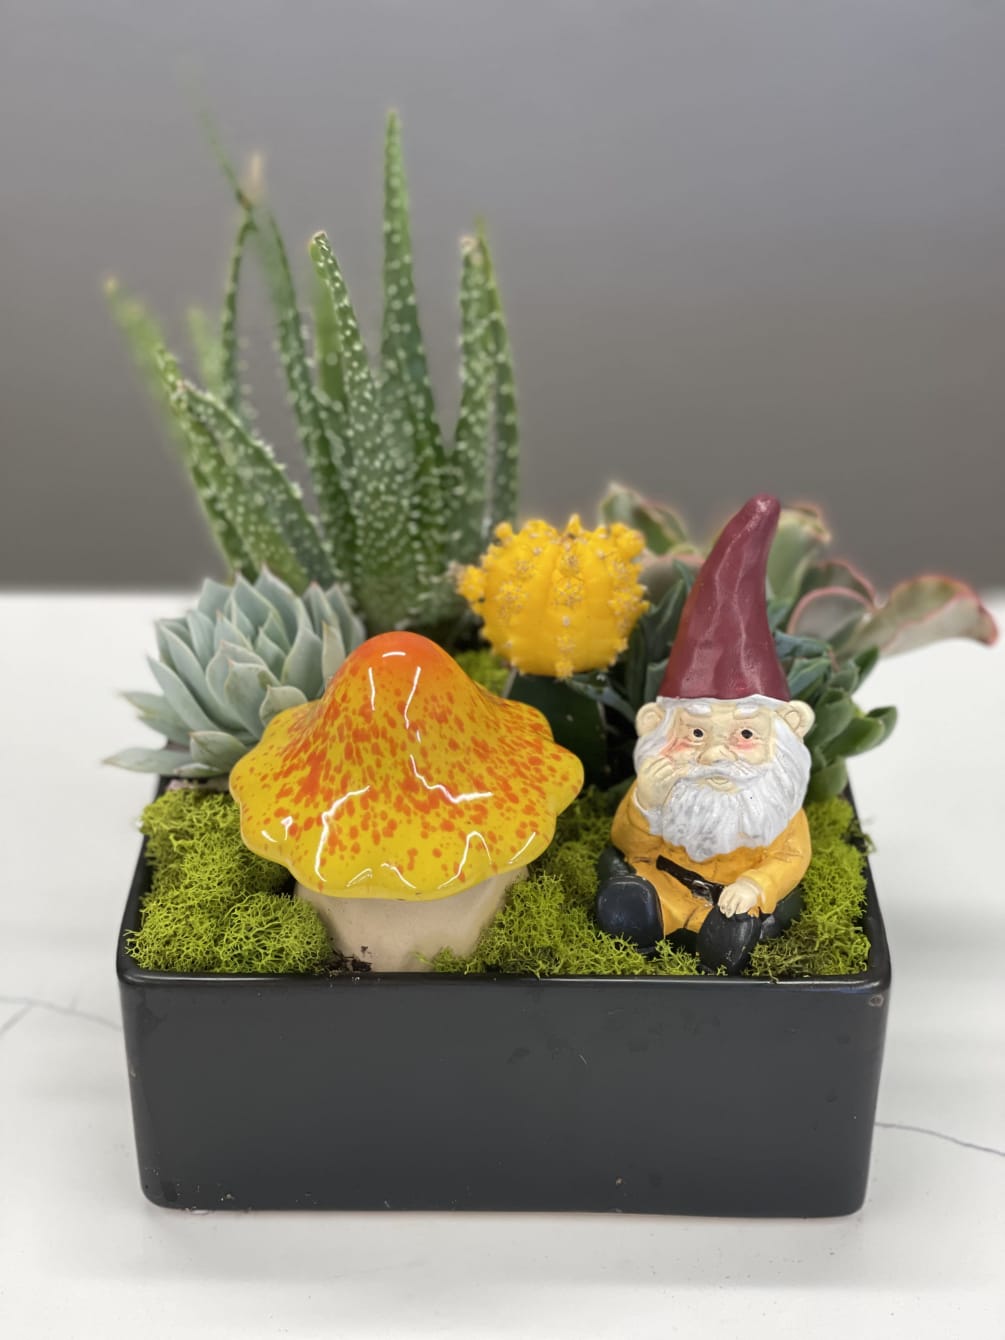 Happy yellow home gnome amongst an easy to care for succulent garden-